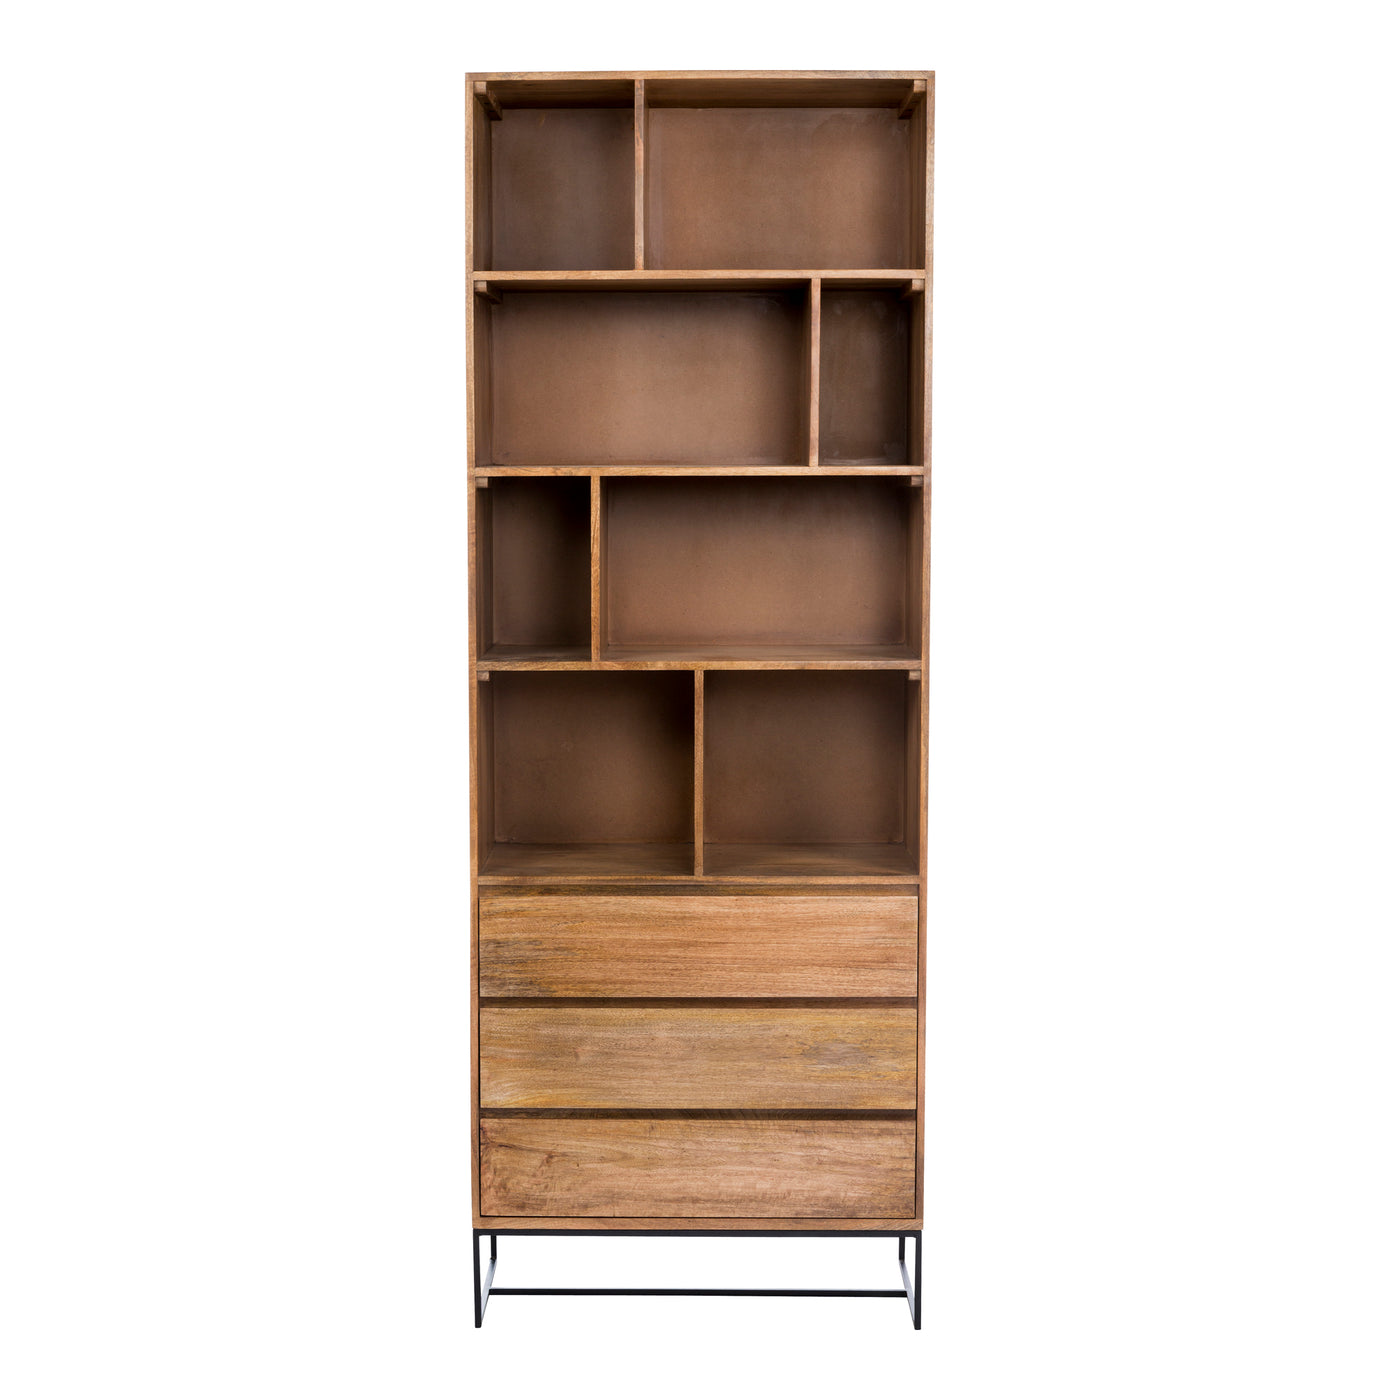 Storage solved. The Colvin shelving unit features strong, clean lines complete with iron detailing to accompany its contem...